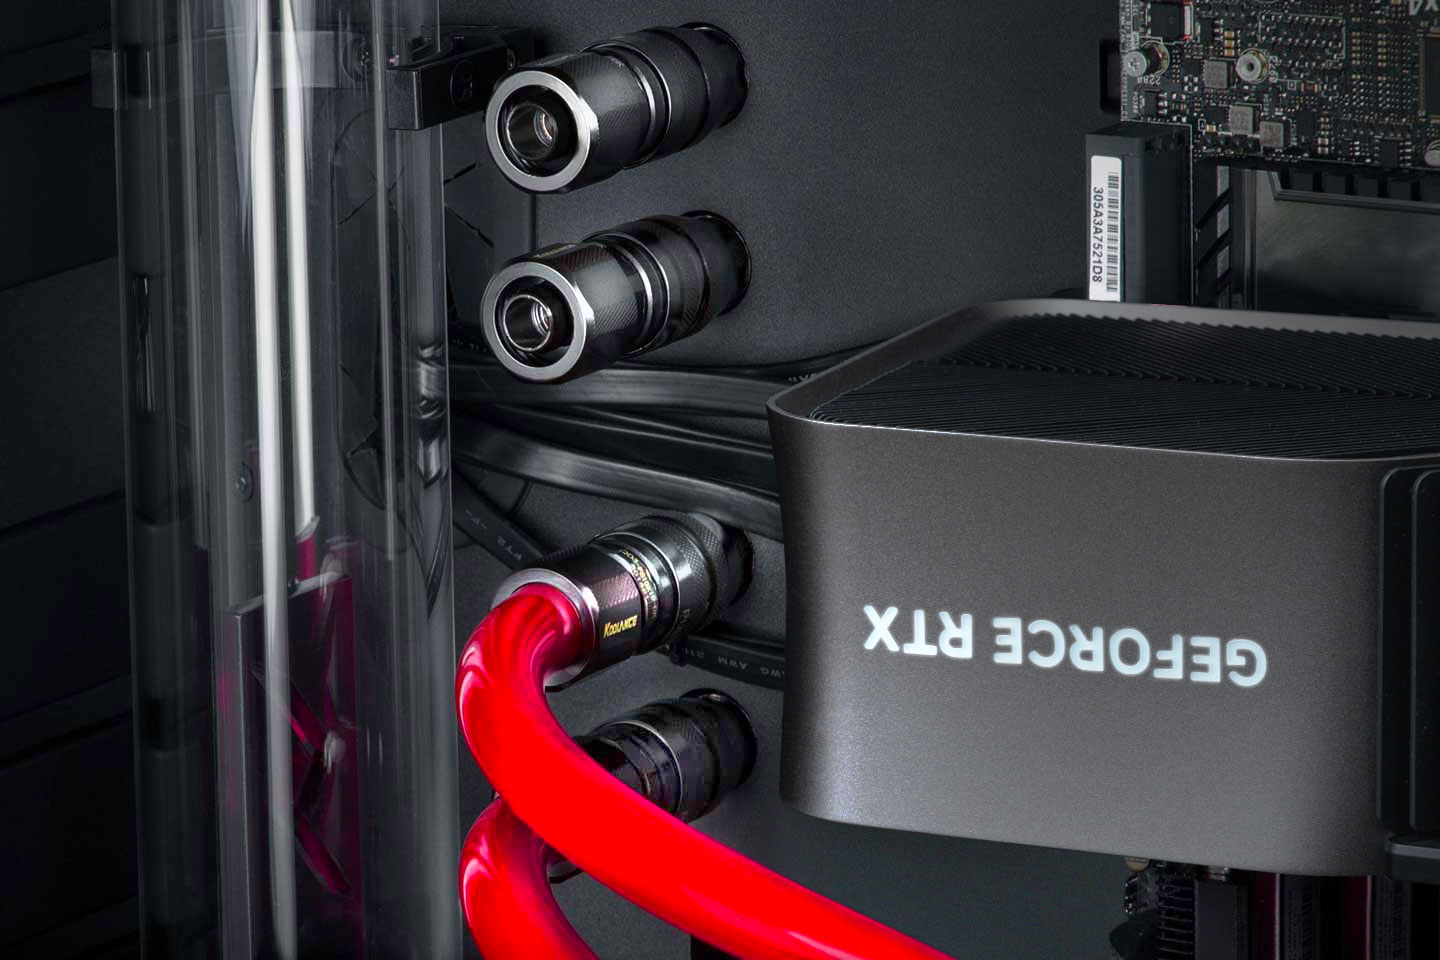 Aventum-X insides featuring cooling ports